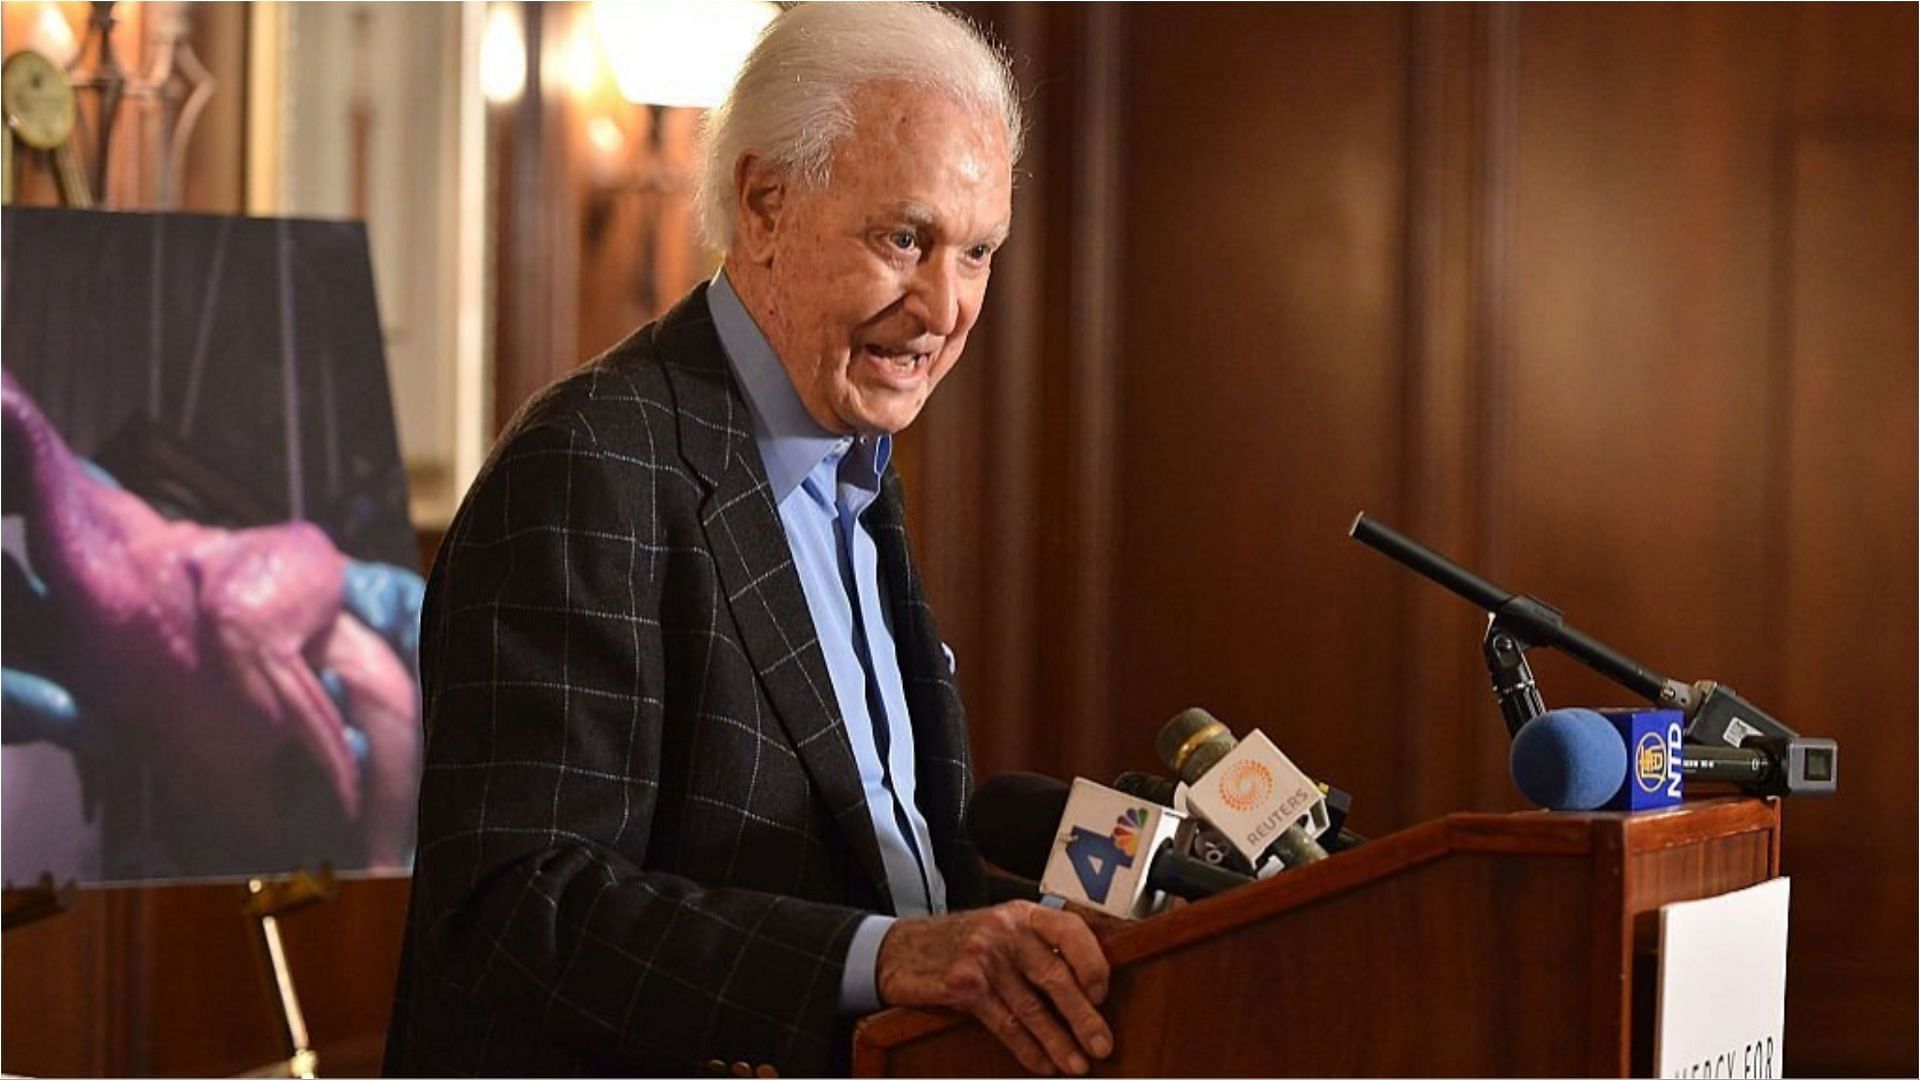 Bob Barker recently died at the age of 99 (Image via Araya Doheny/Getty Images)